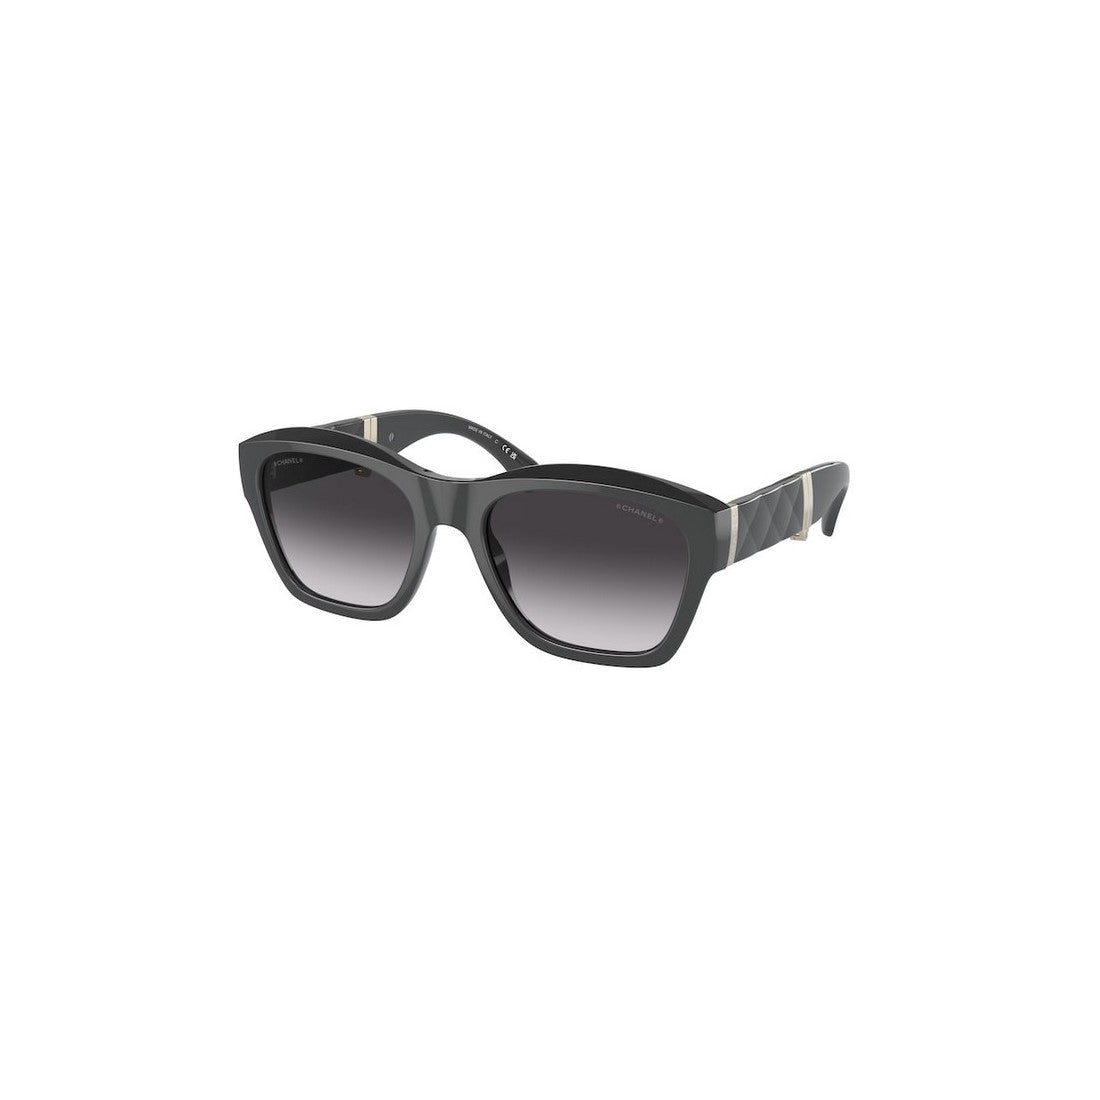 Stylish Black Sunglasses for Women - Chic and Sophisticated Design